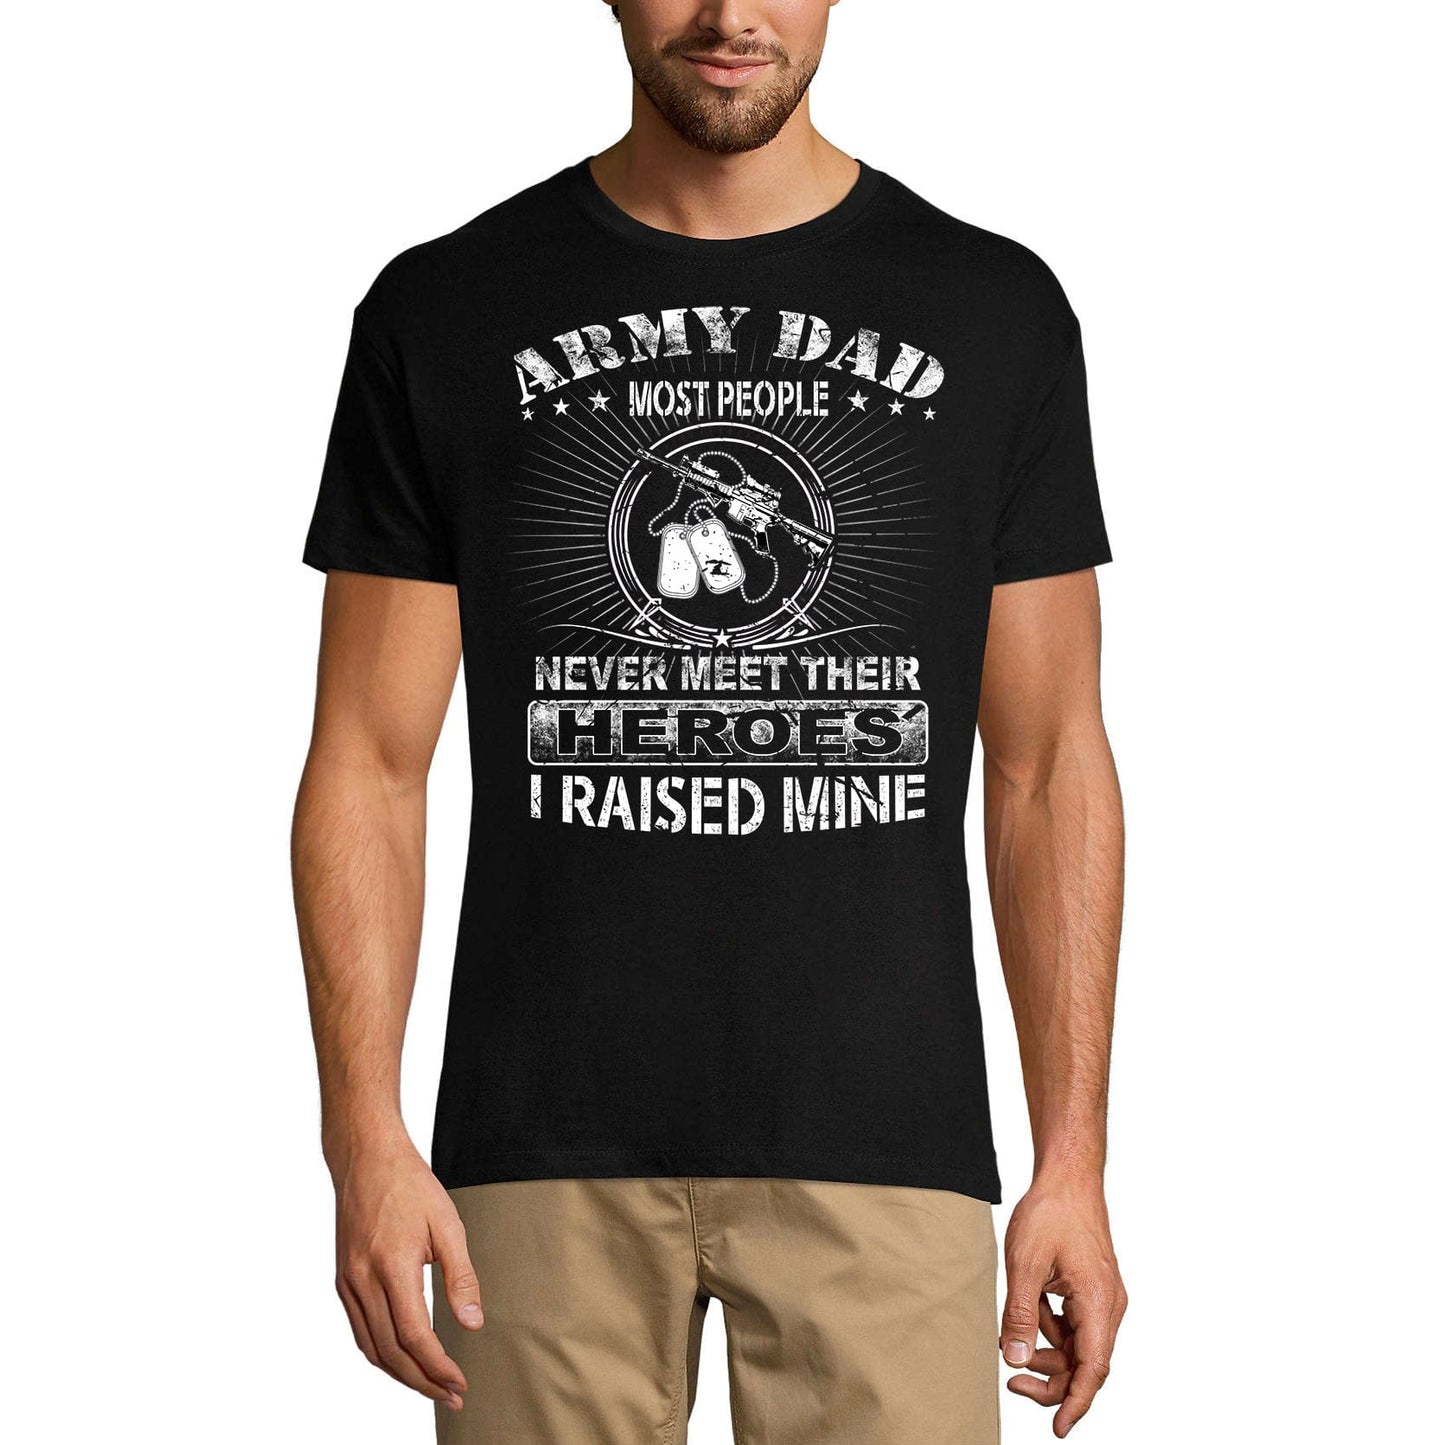 ULTRABASIC Men's Novelty T-Shirt Army Dad - Father Heroes Tee Shirt